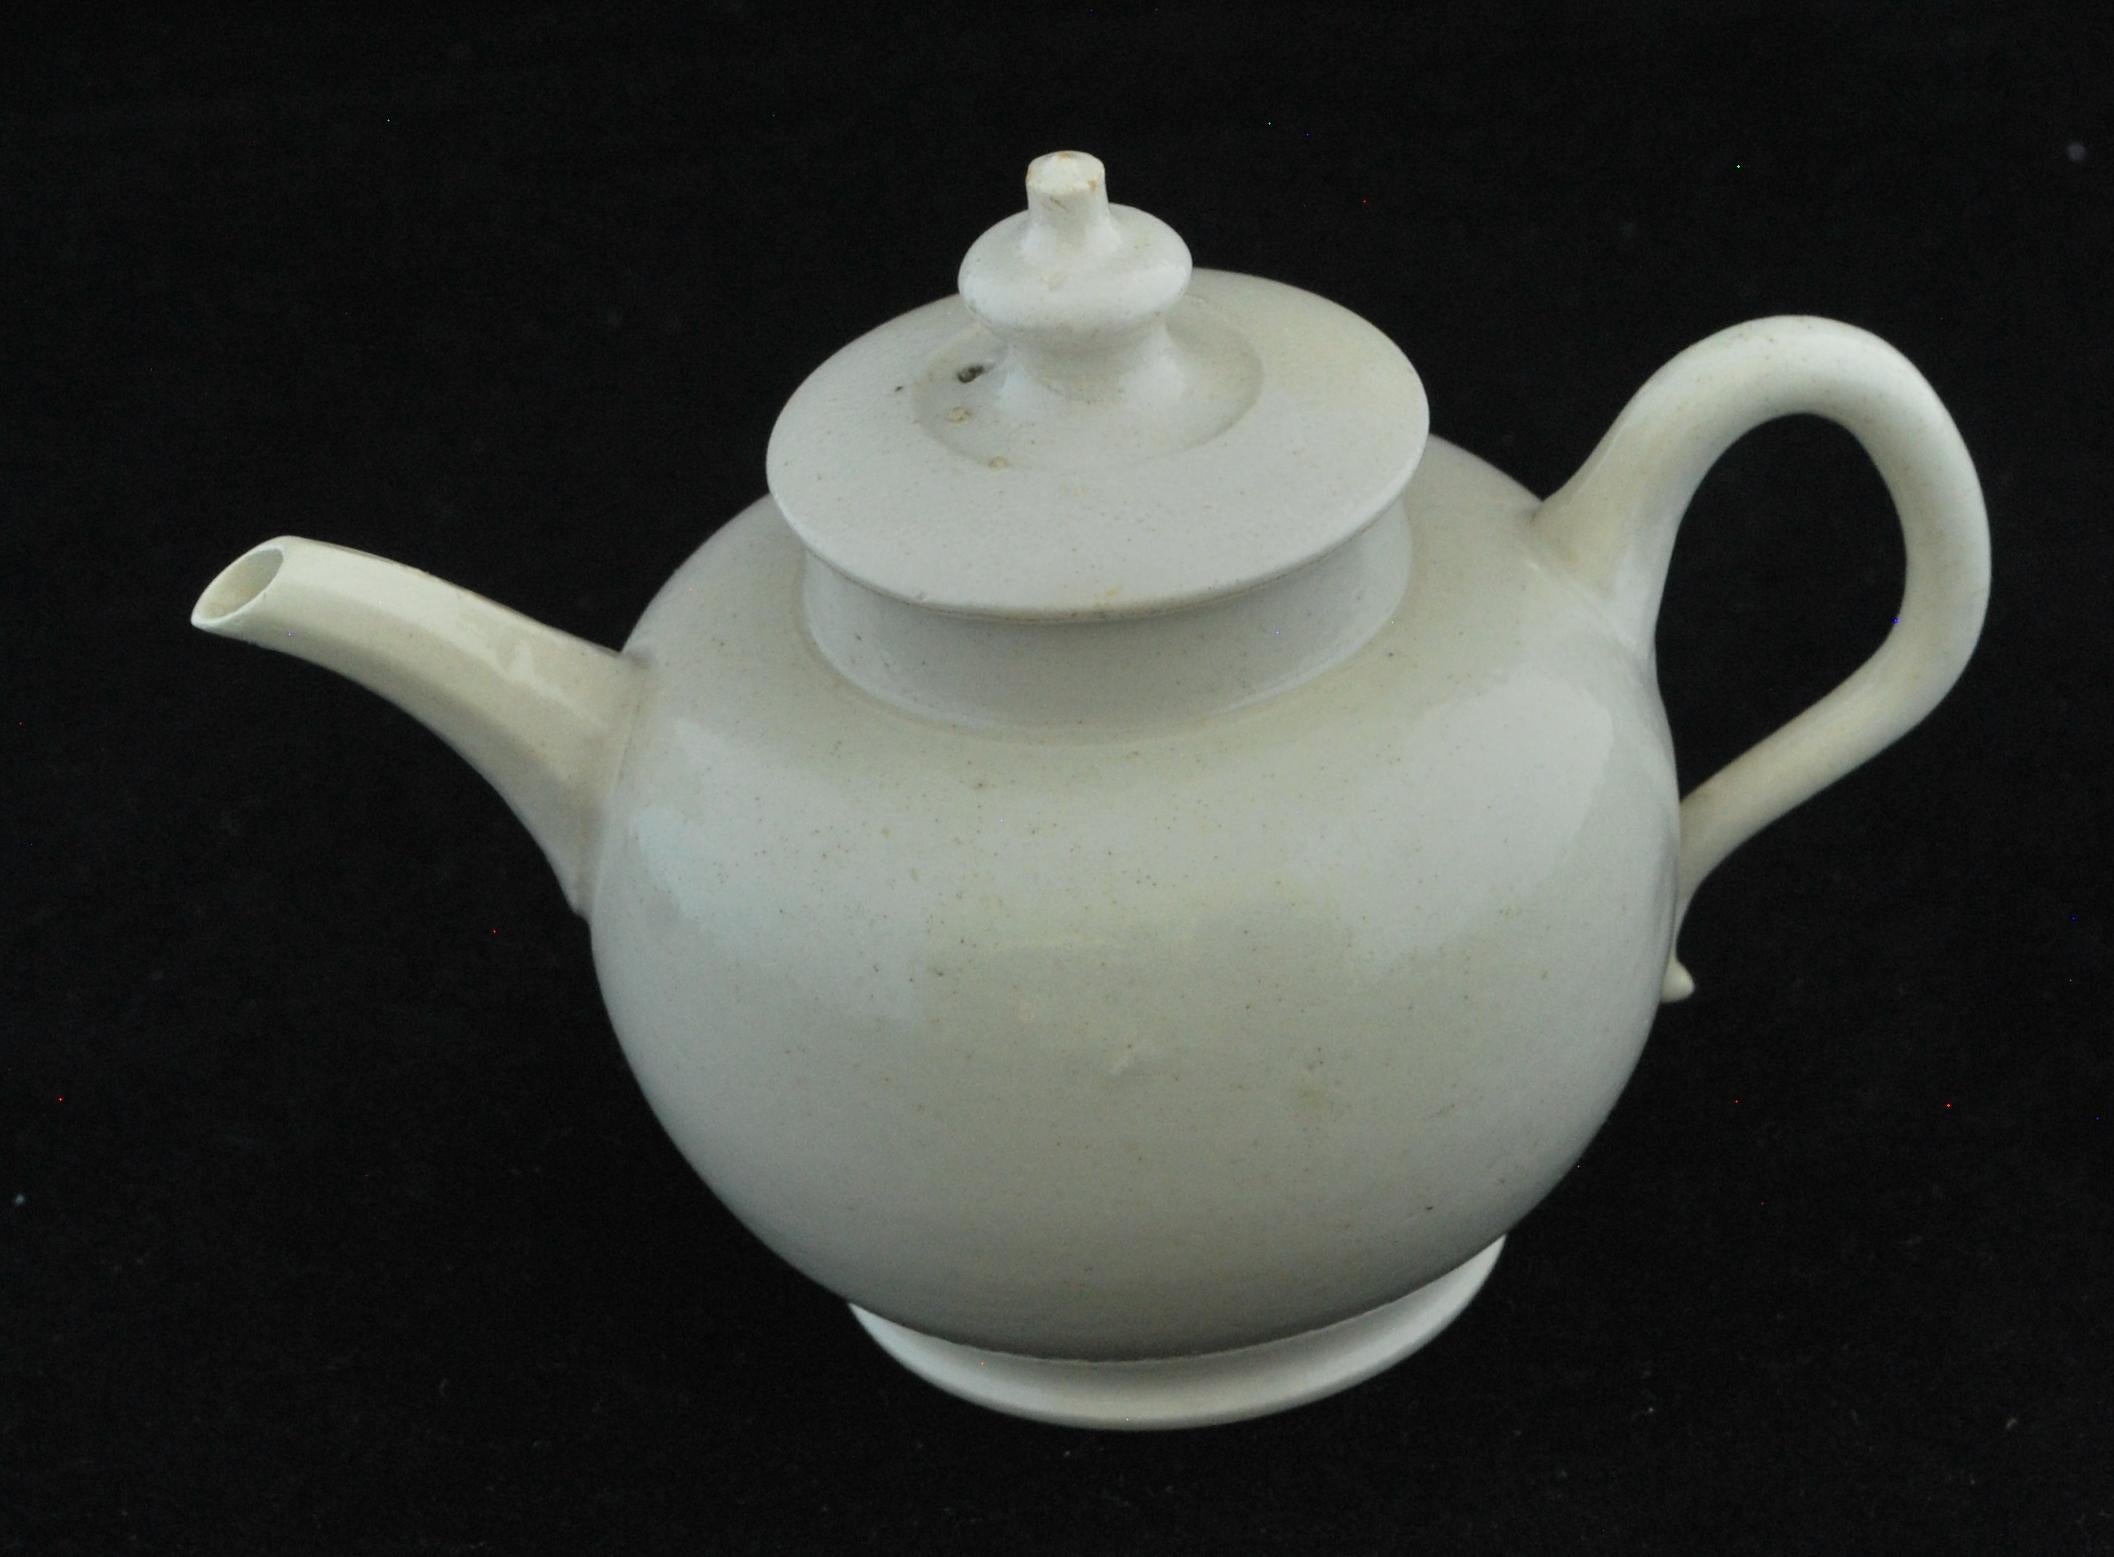 A fine, one-cup teapot in undecorated salt-glazed earthenware. The size reflects the early custom of a pot to each tea drinker.
   